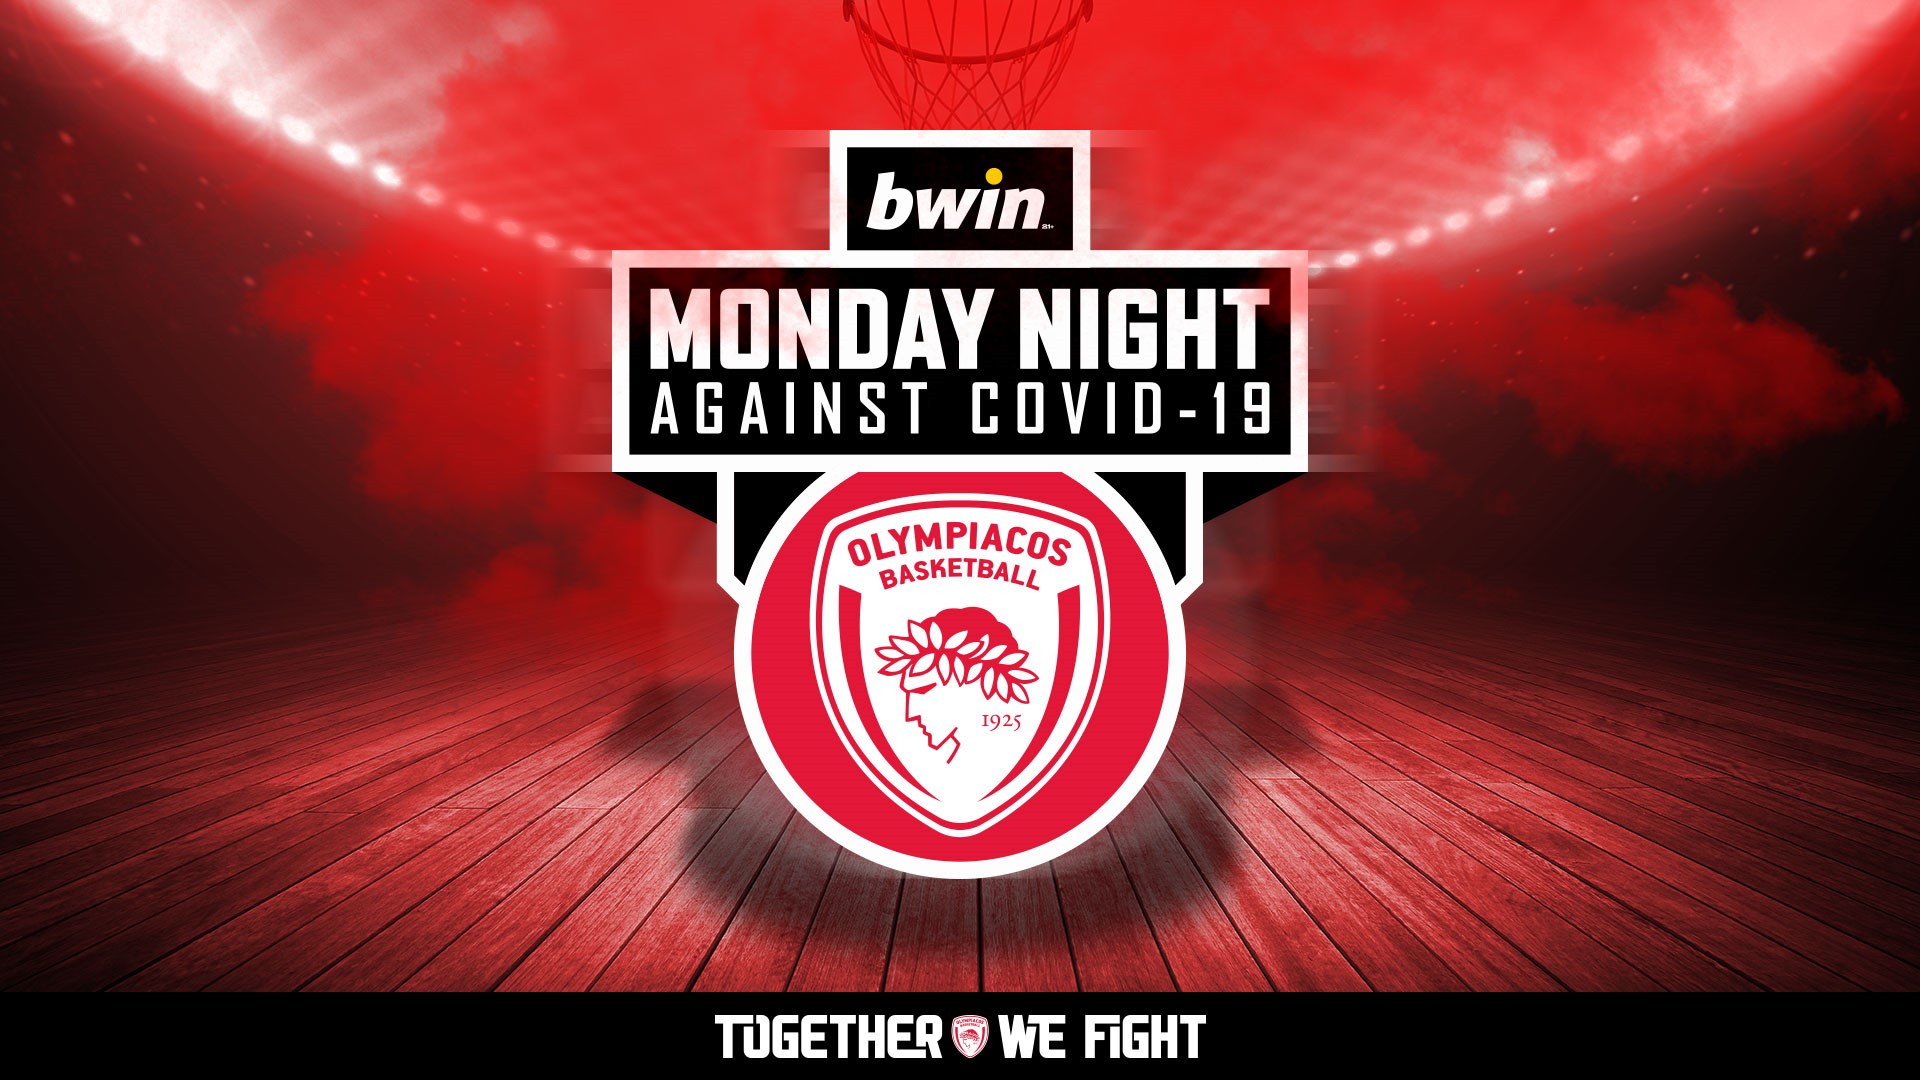 Bwin Sponsors The Naming Of Monday Night Game Against Covid